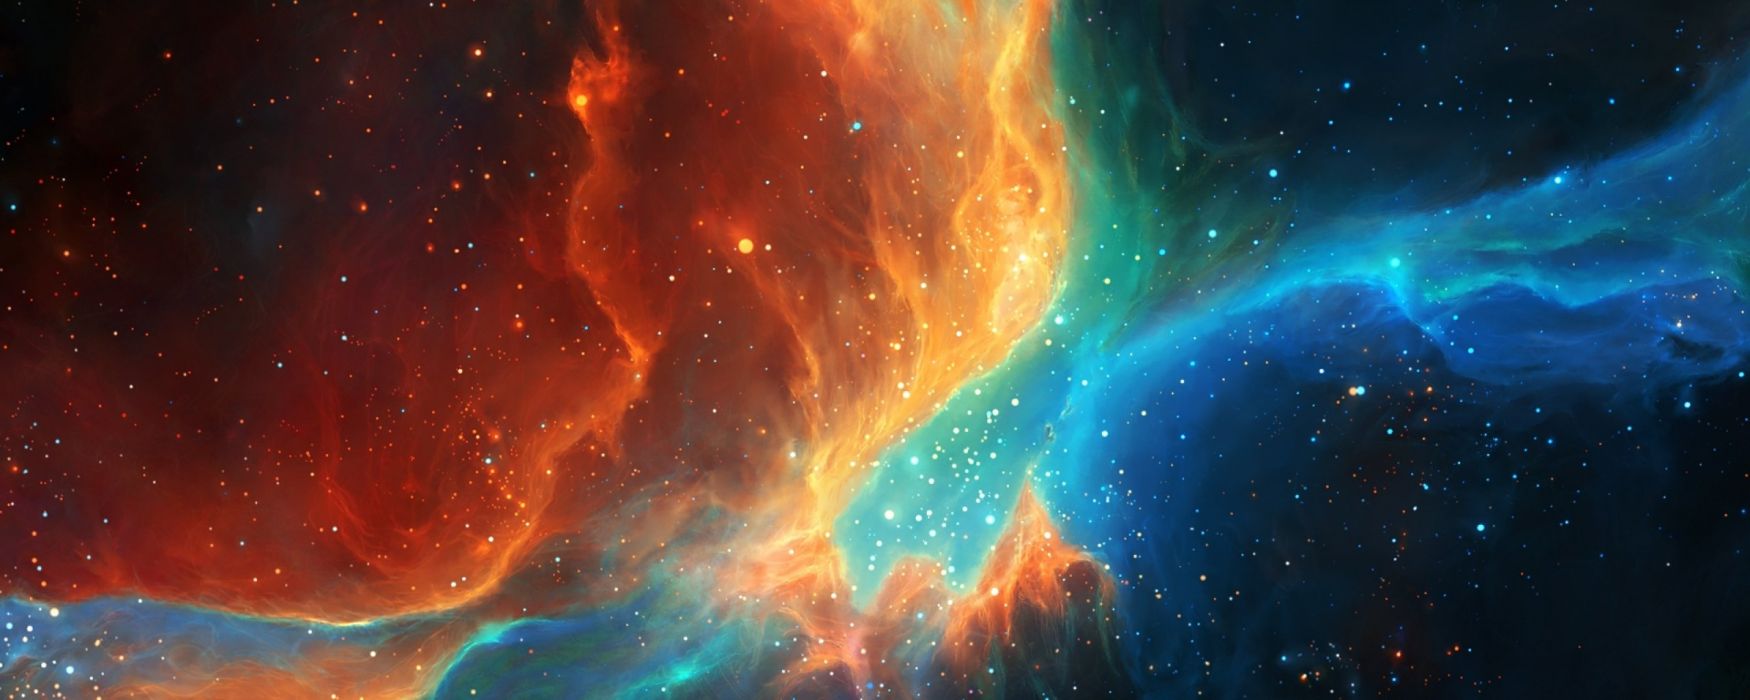 two monitor wallpaper,nature,sky,outer space,geological phenomenon,nebula